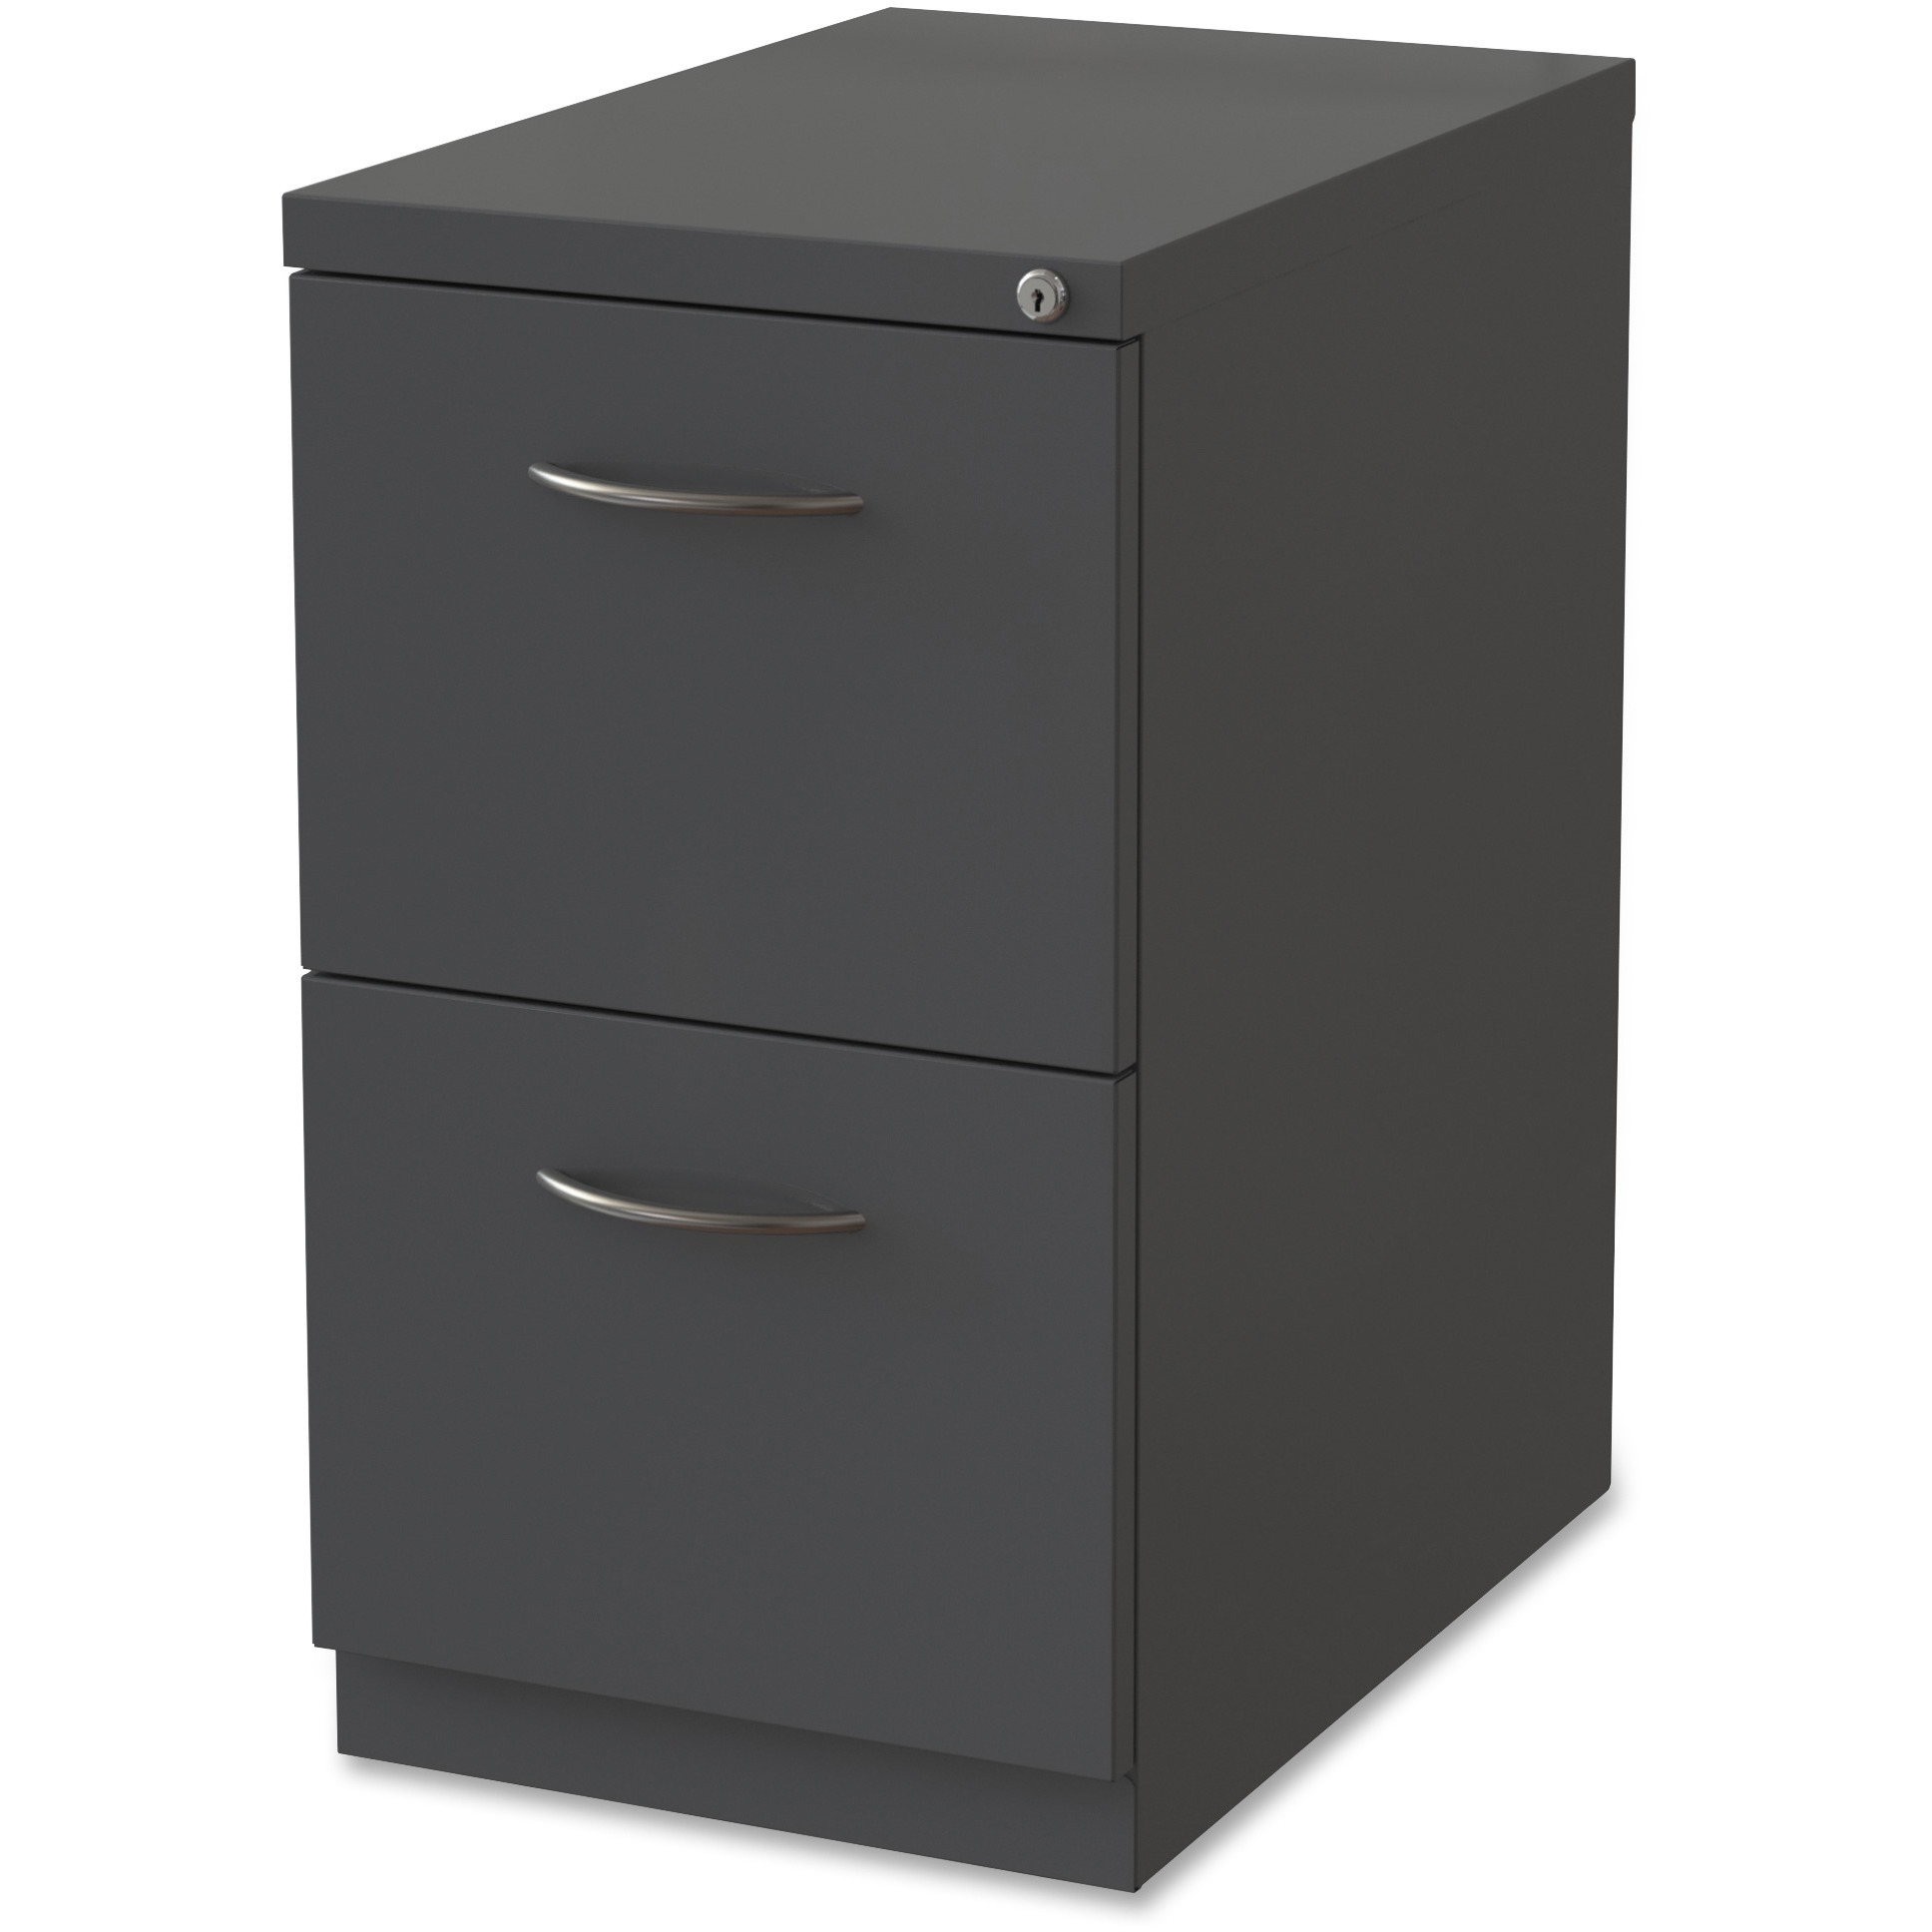 2 Drawers Vertical Steel Lockable Filing Cabinet, Gray - image 1 of 3